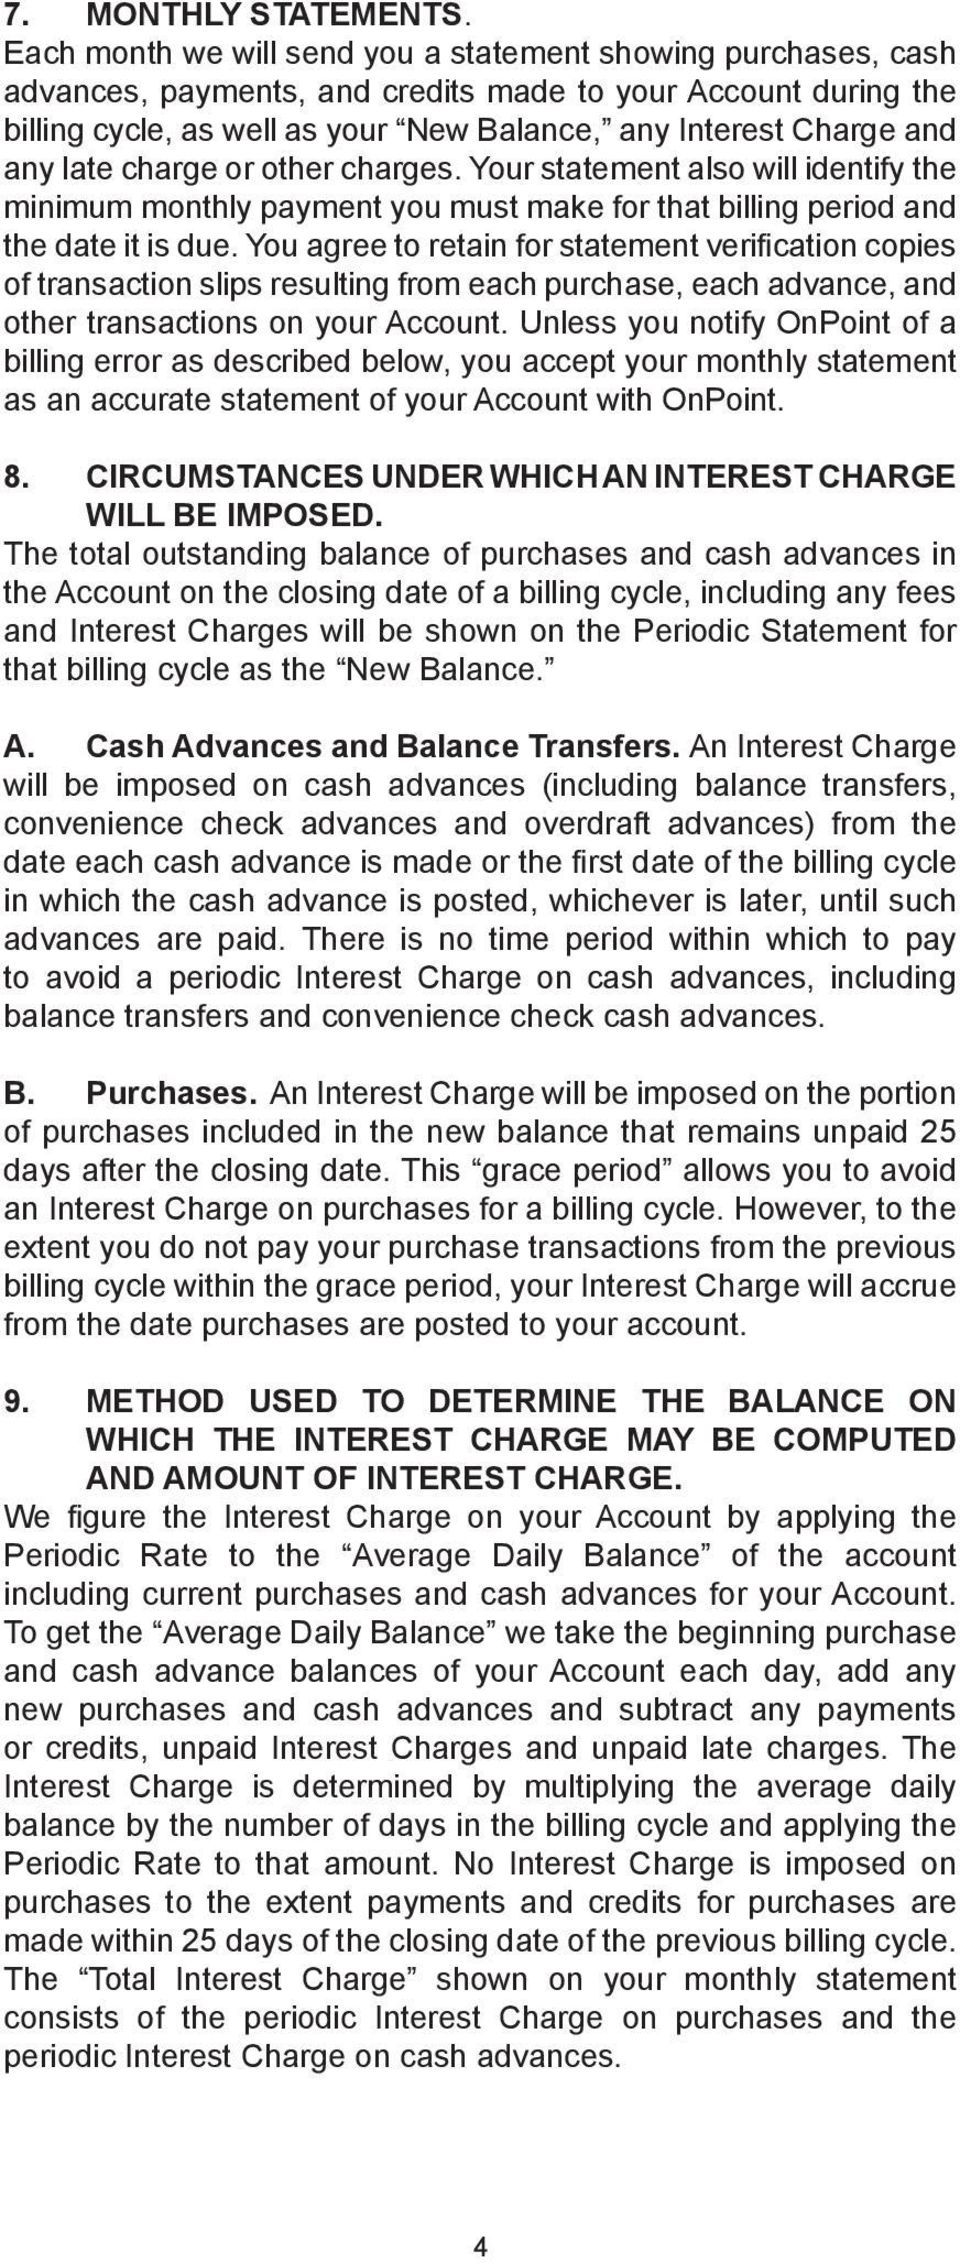 late charge or other charges. Your statement also will identify the minimum monthly payment you must make for that billing period and the date it is due.